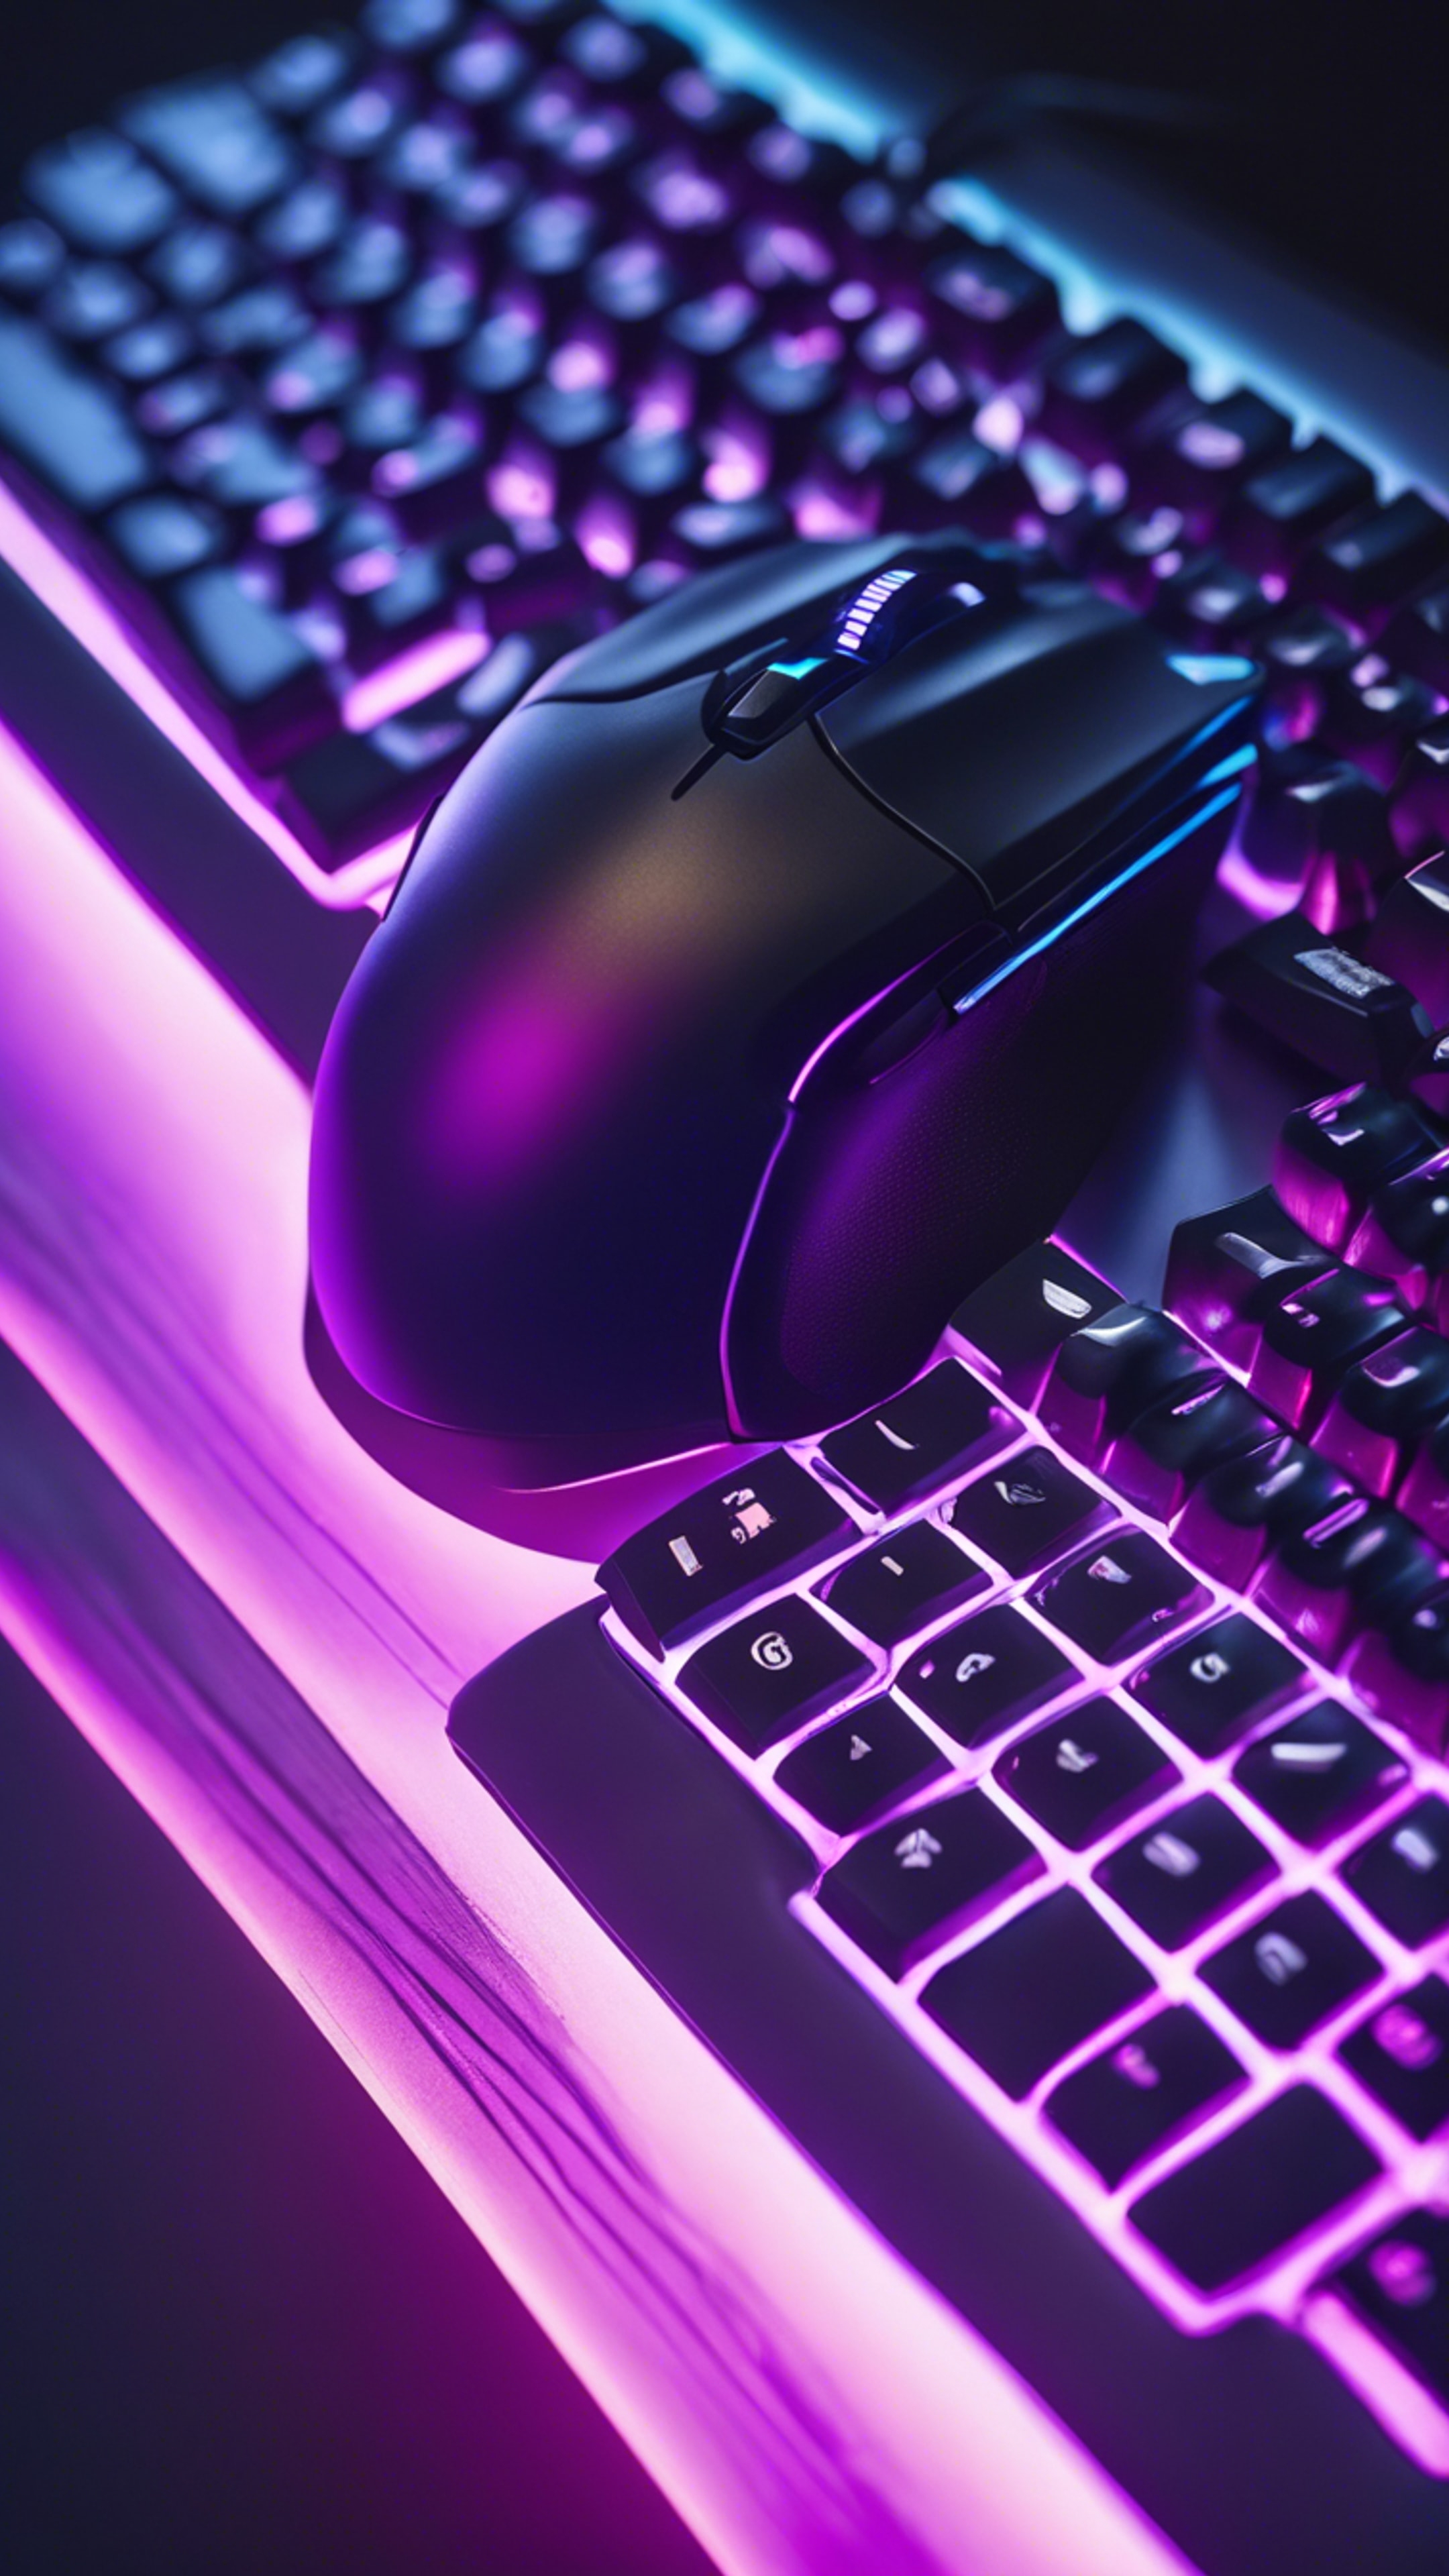 A top down view of a gaming keyboard and mouse bathed in a soothing gradient of blue to purple backlighting. Tapetai[d1c9d3144afe4da3b536]